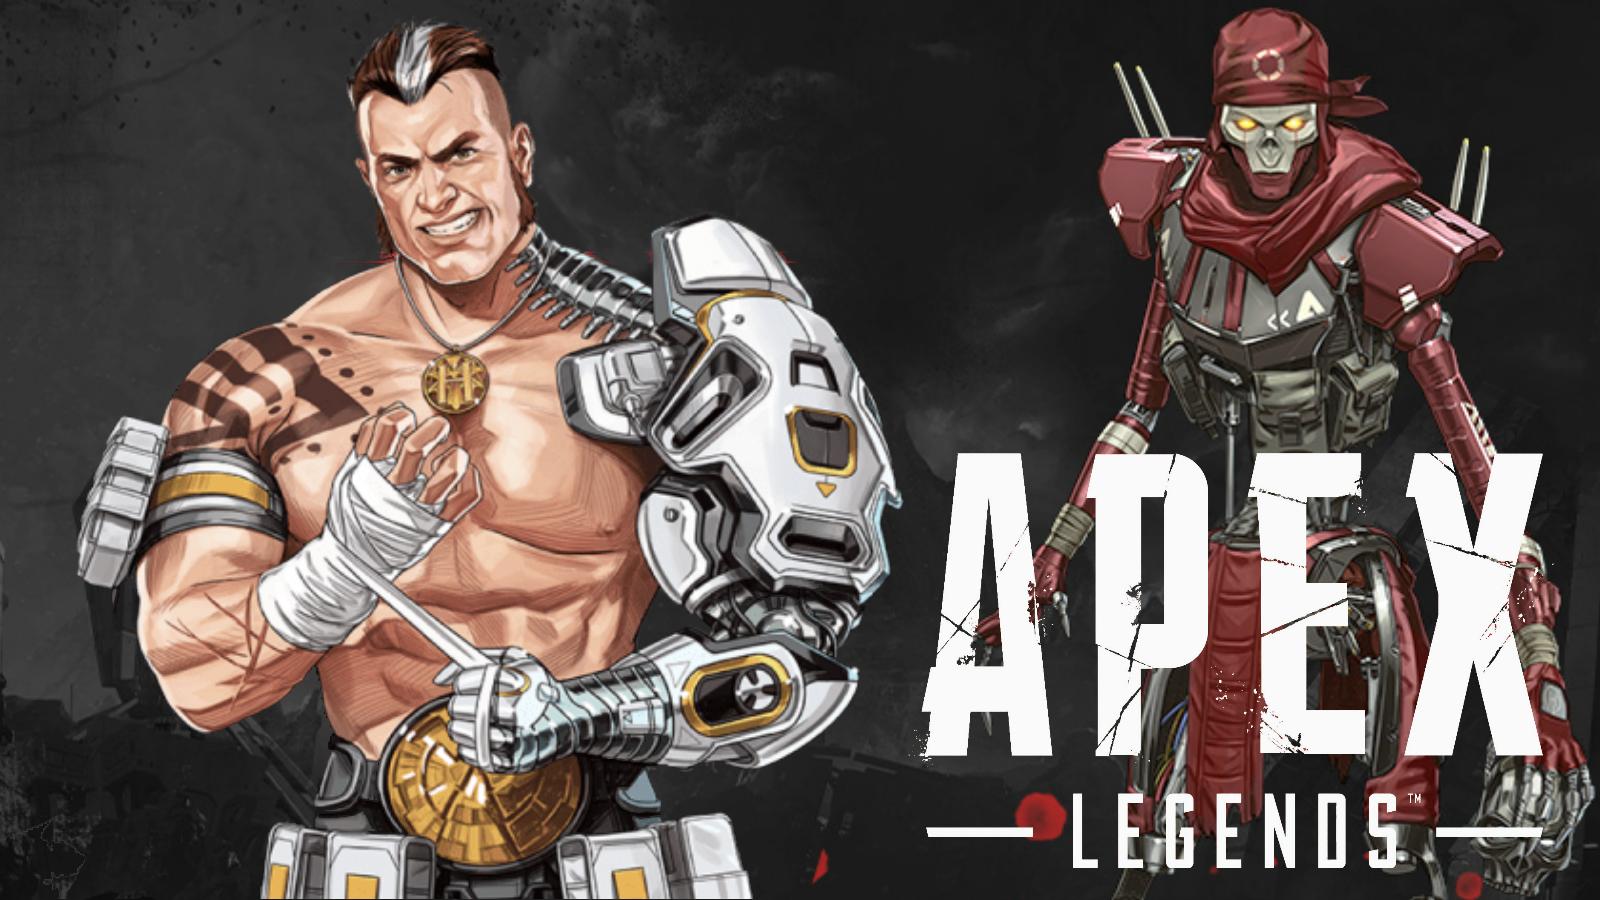 Revenant standing behind Forge with black background and apex legends logo